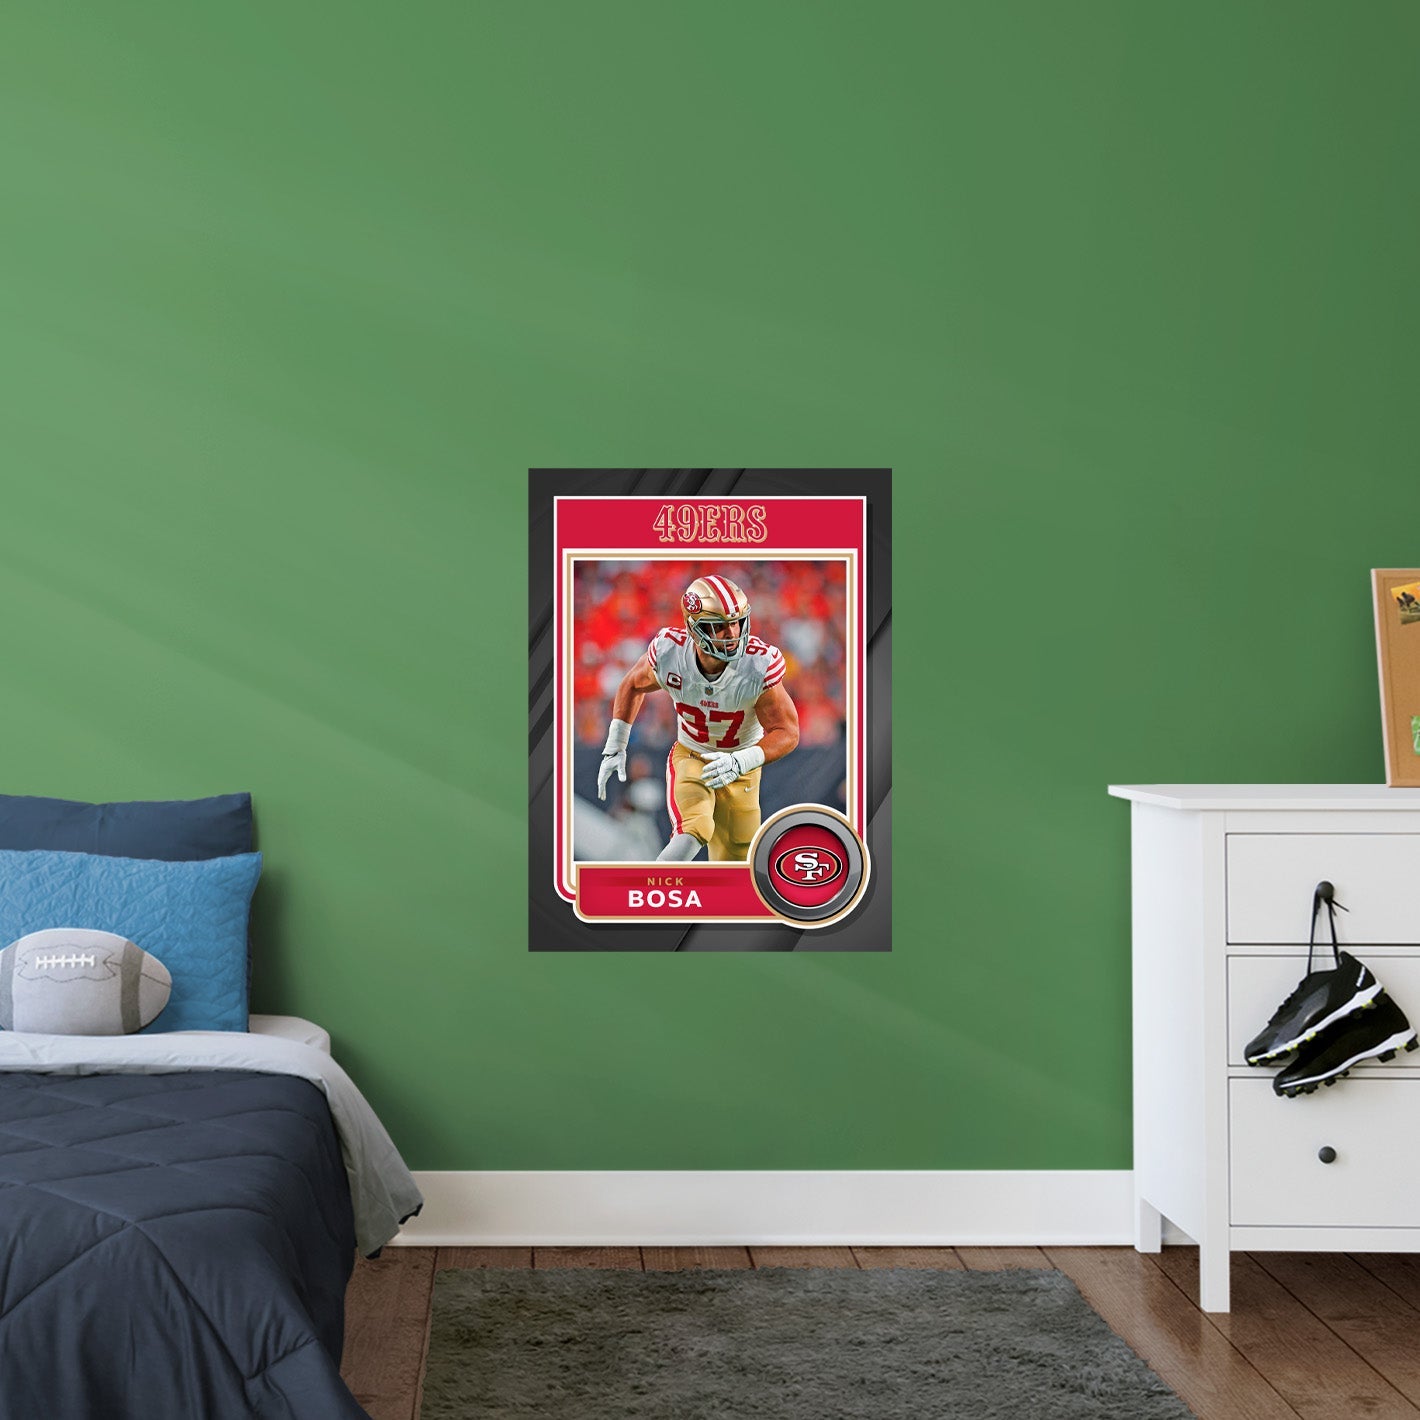 San Francisco 49ers: Nick Bosa Poster - Officially Licensed NFL Removable Adhesive Decal